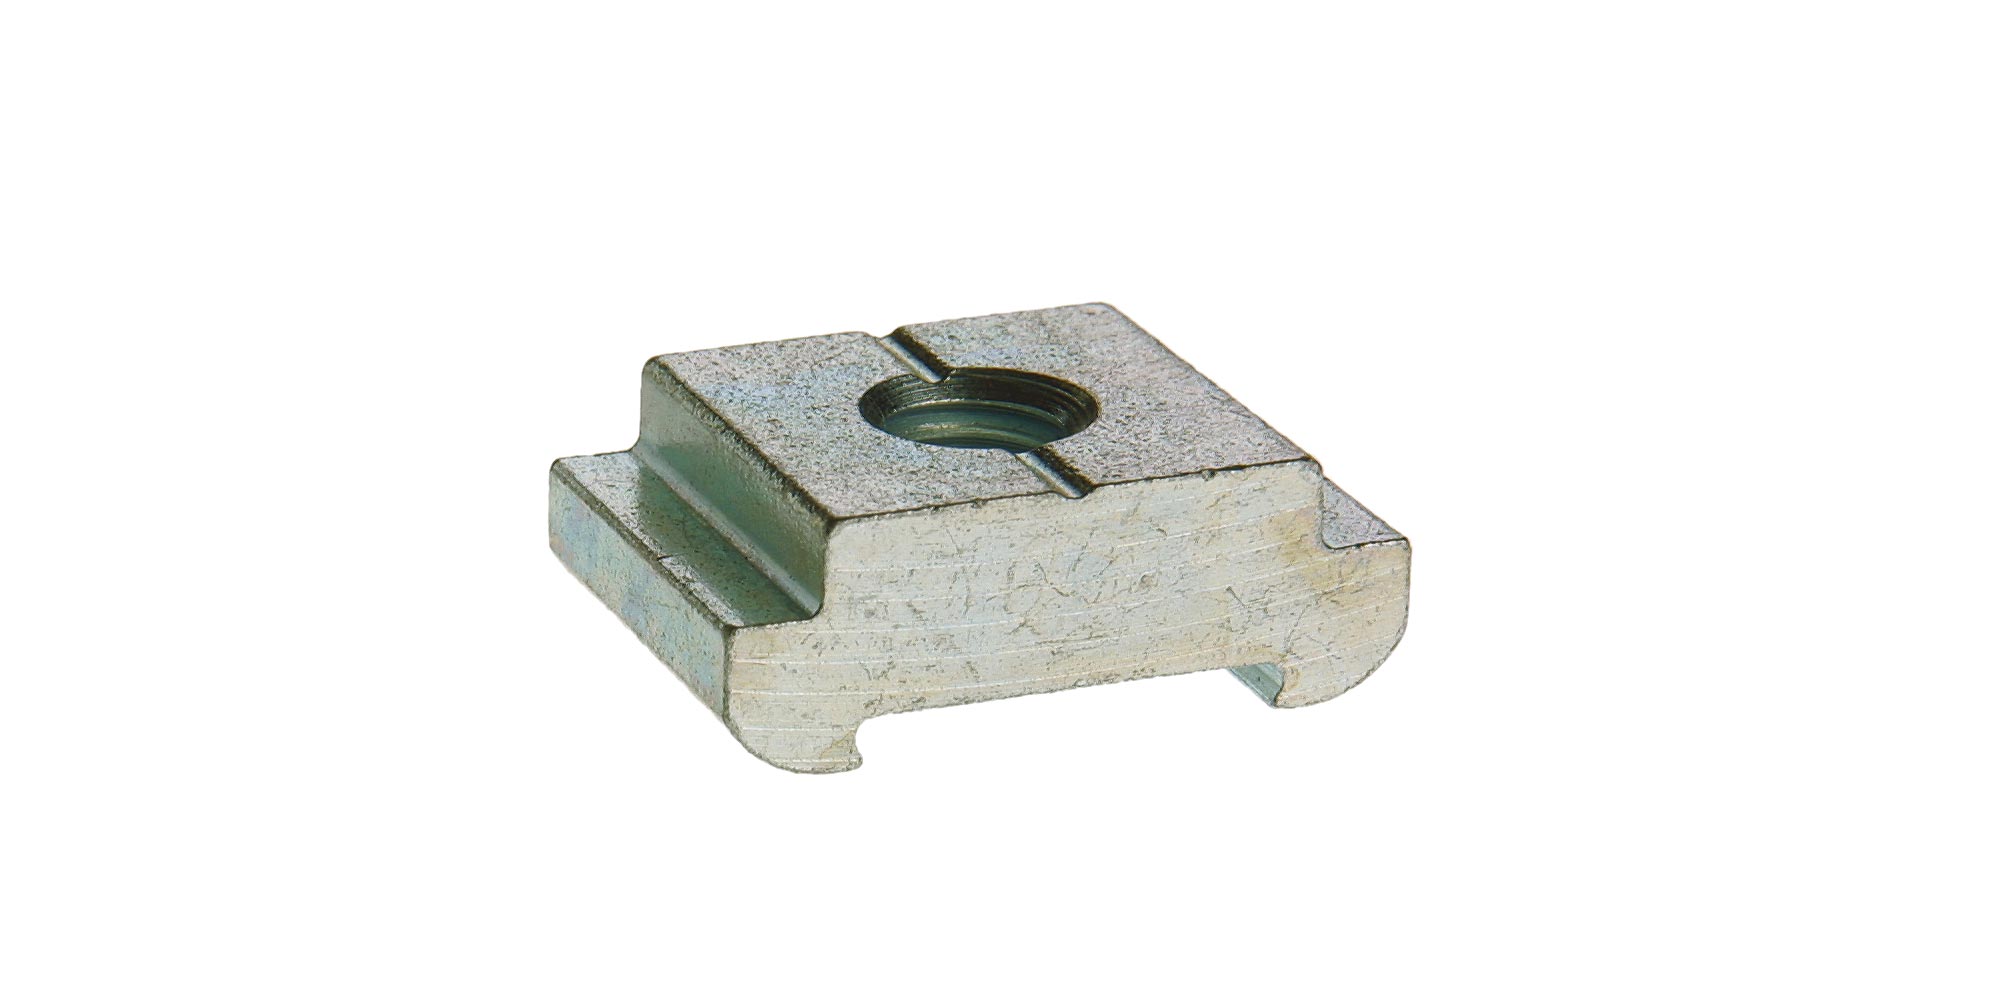 Sliding blocks C30 M4 galvanized steel, without screw, without spring